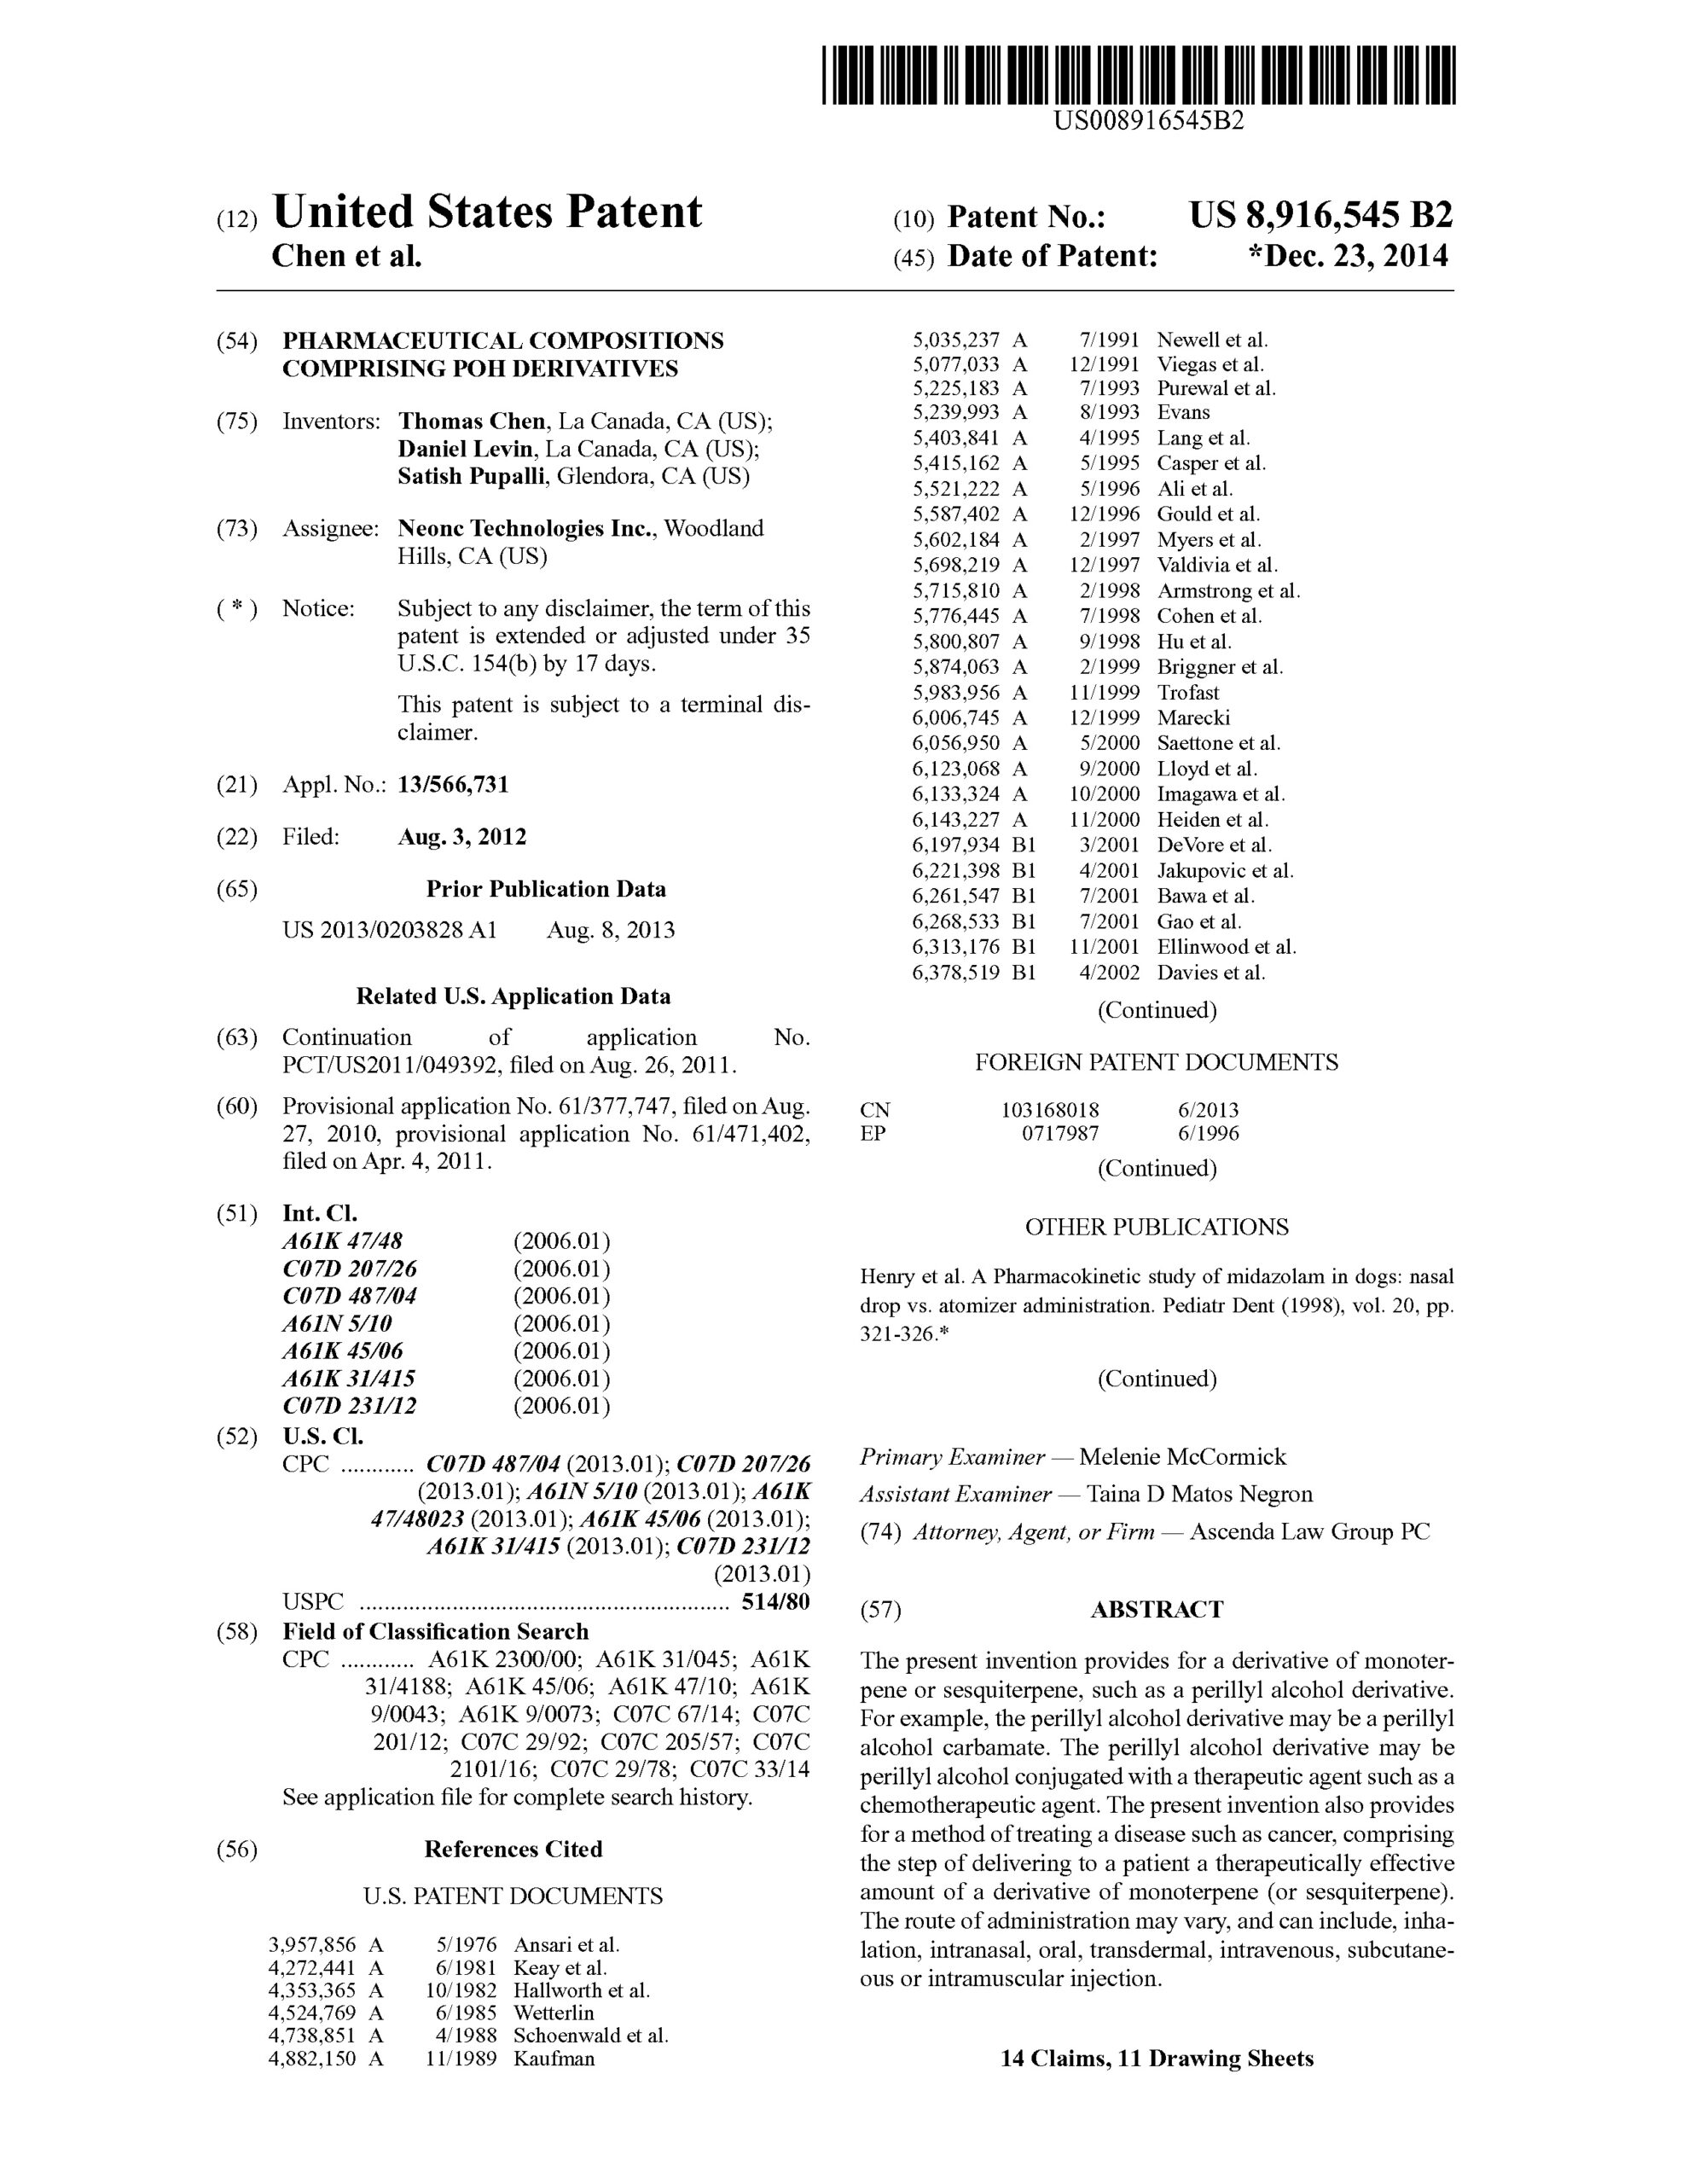 Pharmaceutical Compositions Comprising POH Derivatives